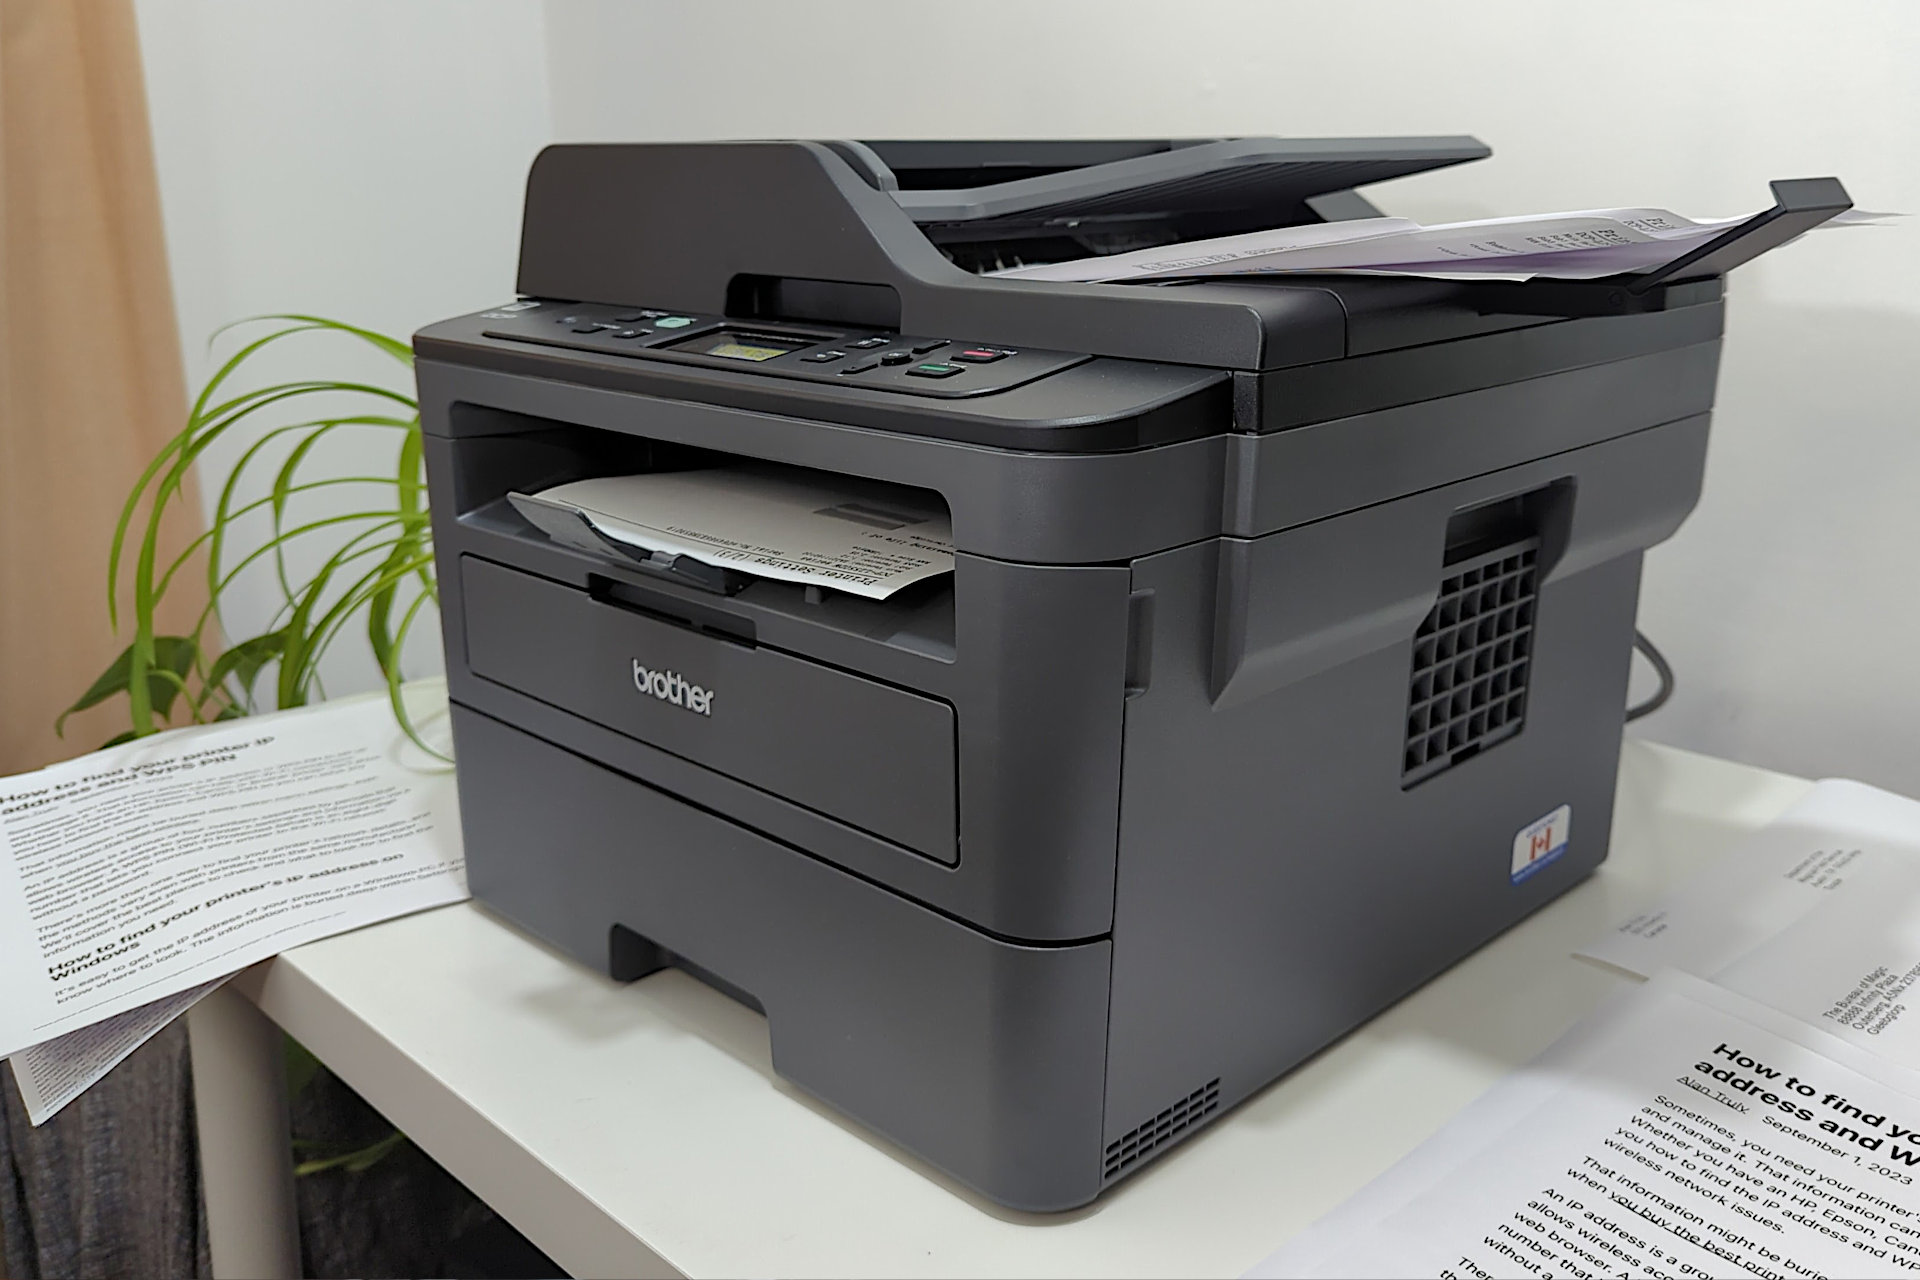 The Brother DCPL2550DW monochrome laser printer outputs 36 ppm.